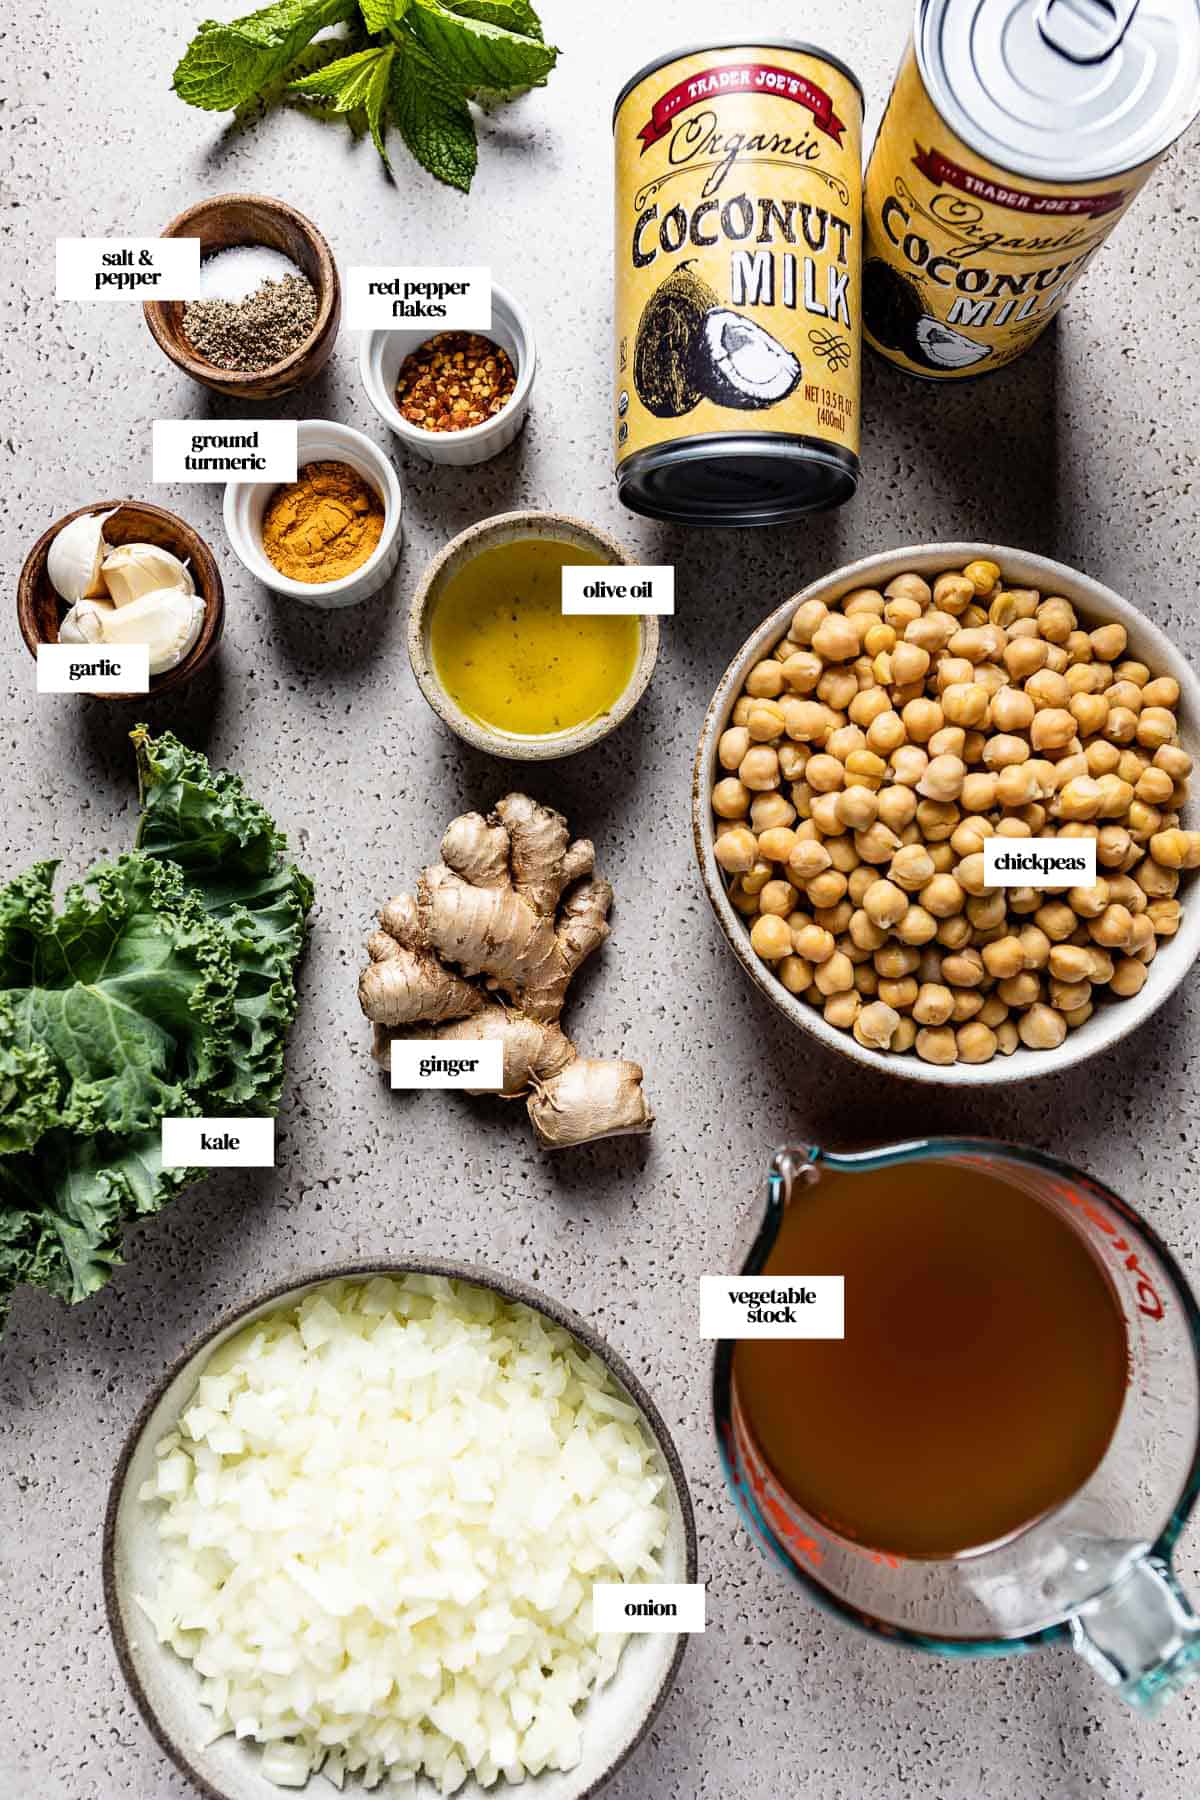 Ingredients for chickpea stew by Alison Roman are in small bowls from the top view.